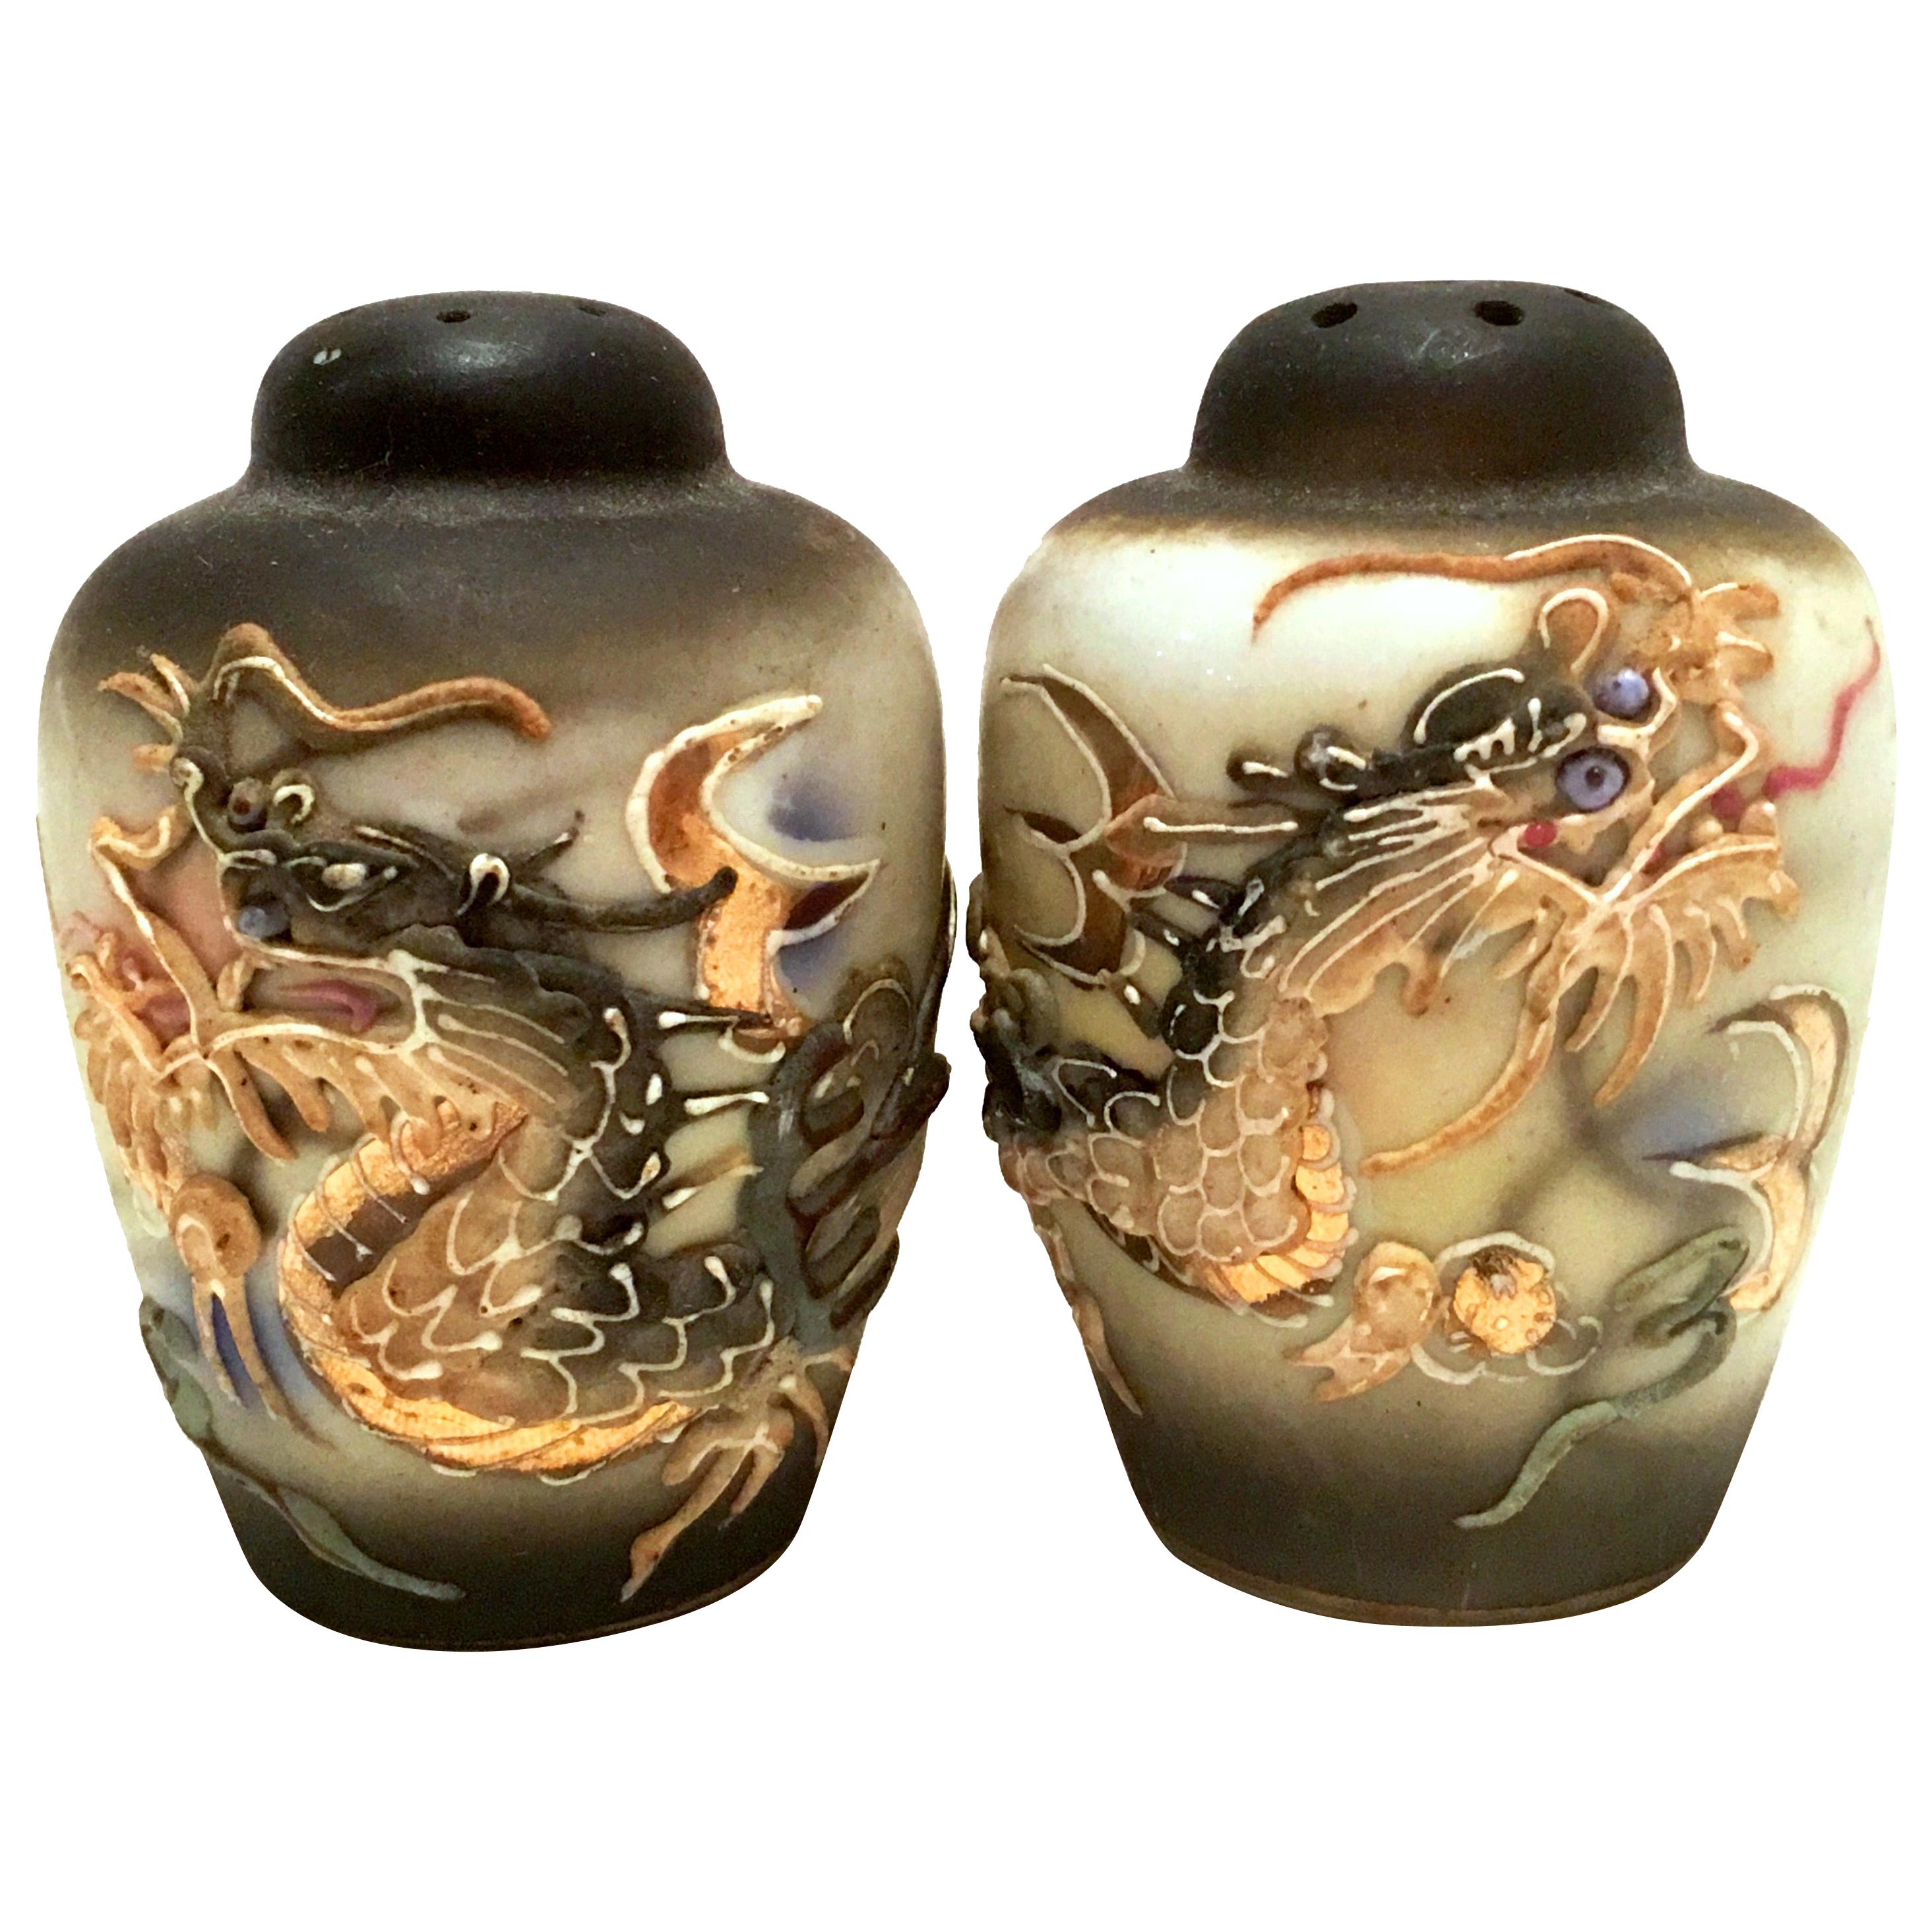 Antique Japanese Hand Painted Porcelain Dragon Ware Salt and Pepper Shaker S/2